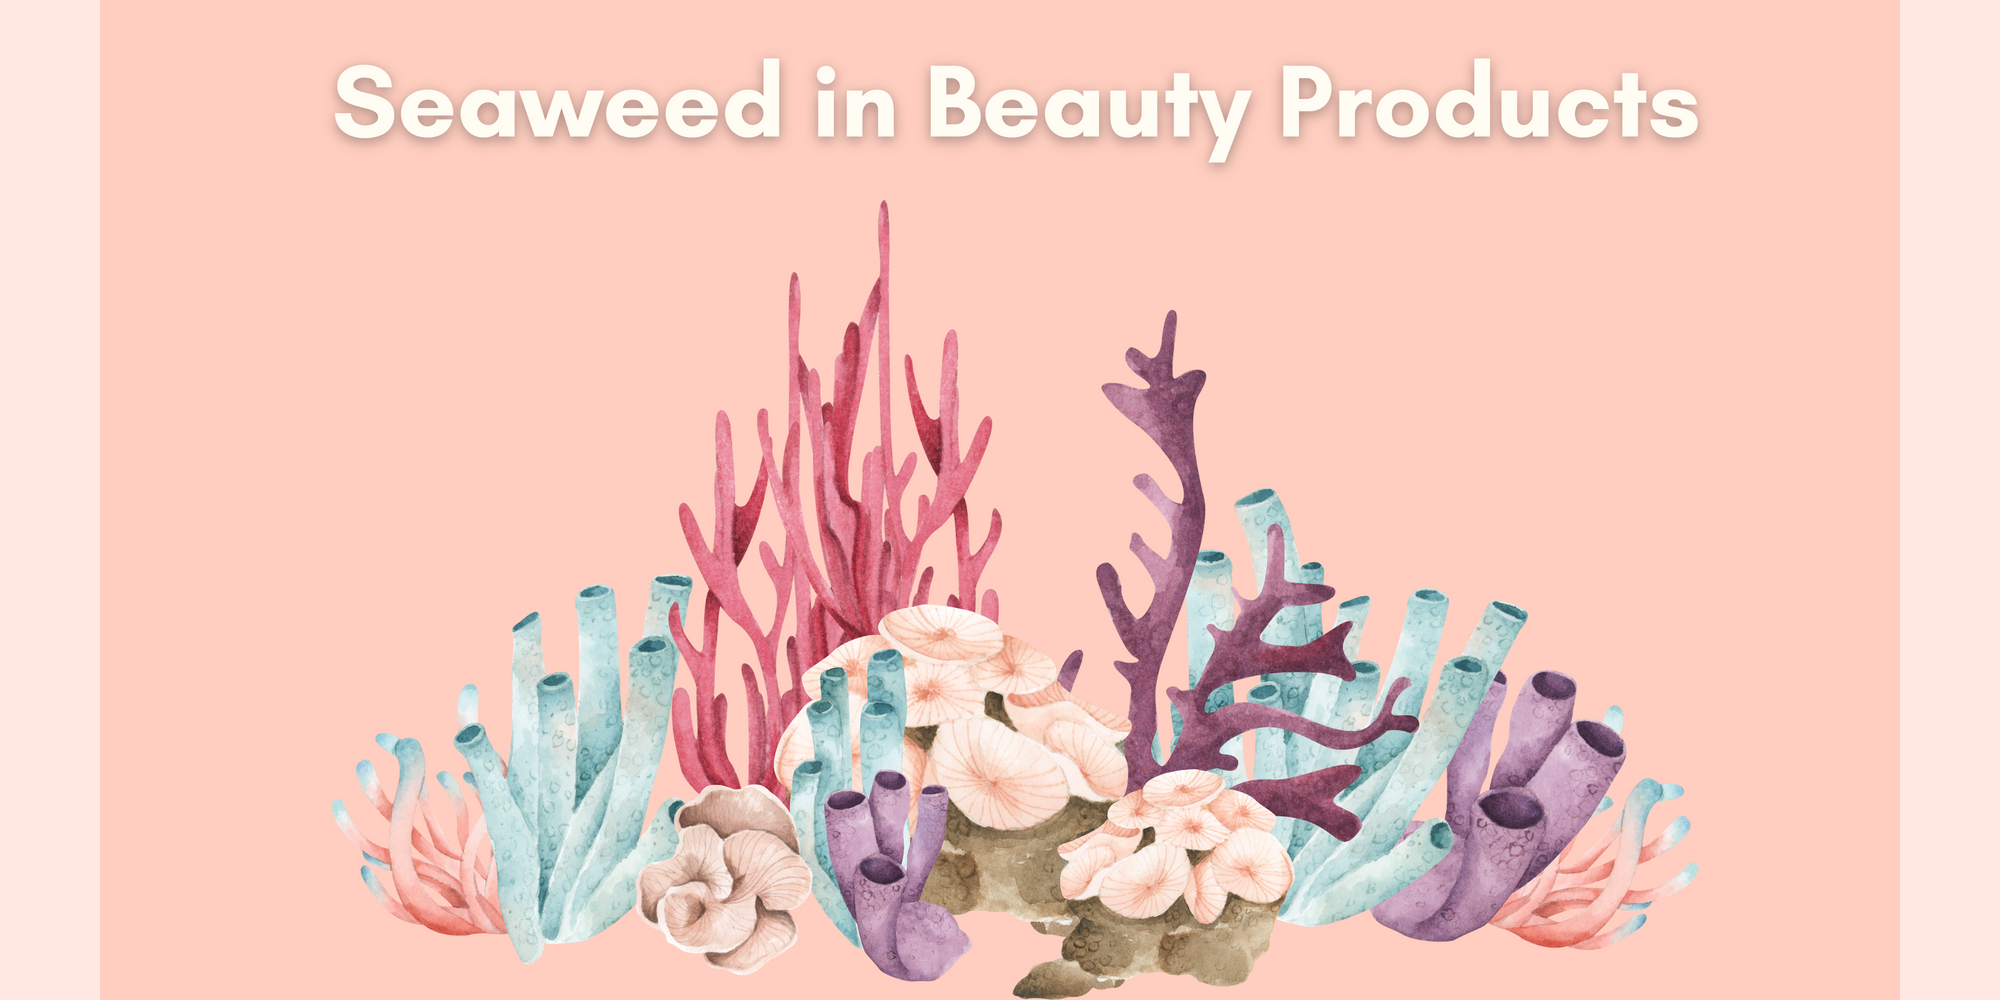 Benefits Of Seaweed In Beauty Products